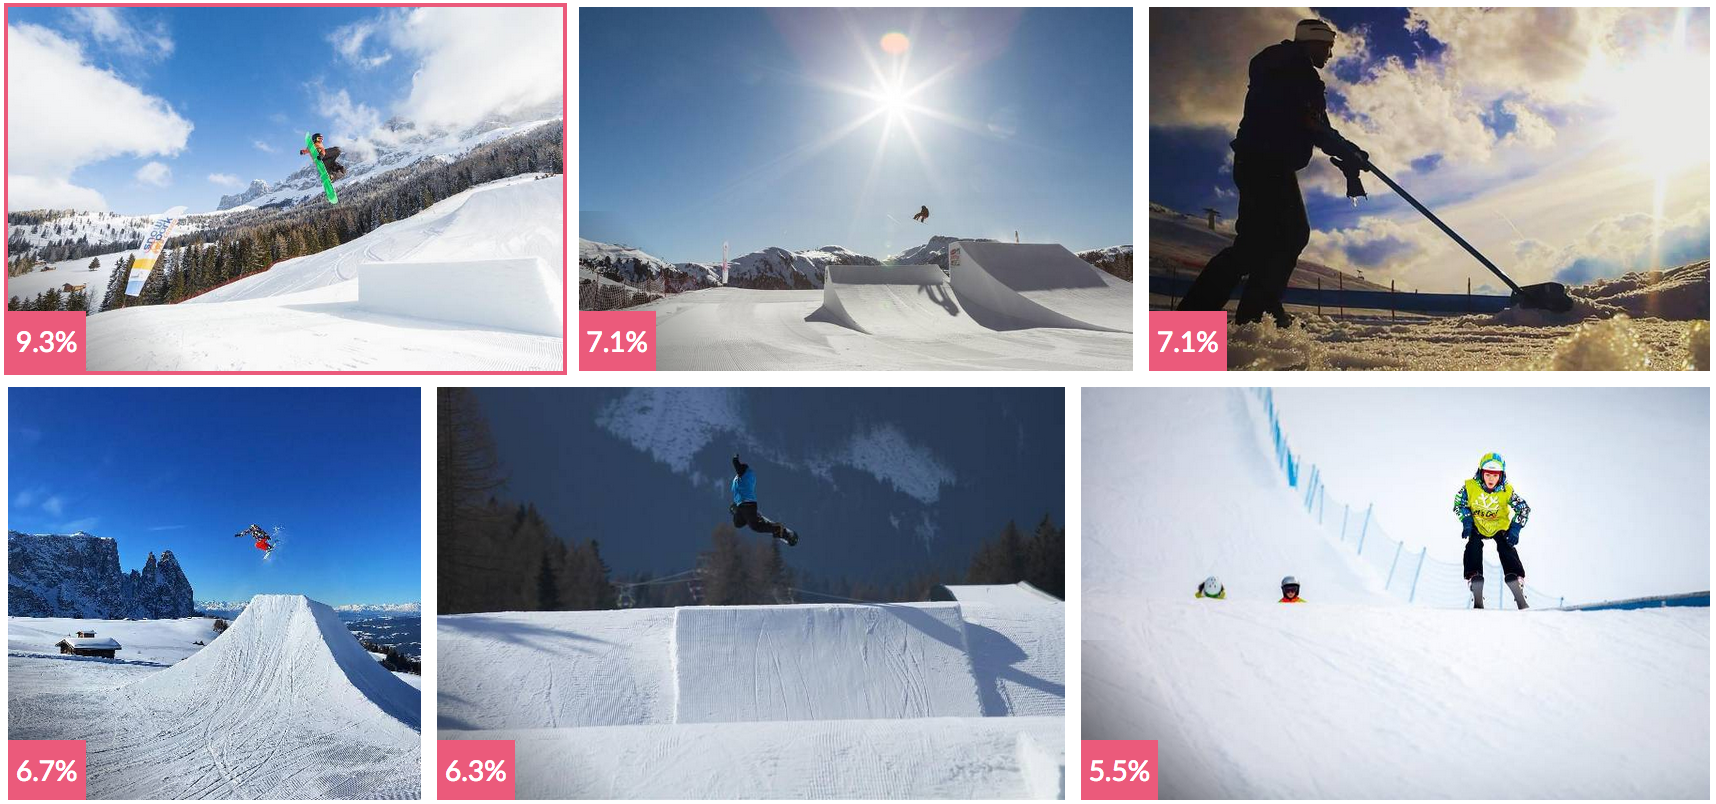 Selection of snowy mountain photos with skiiers and snowboarders - includes performance stats